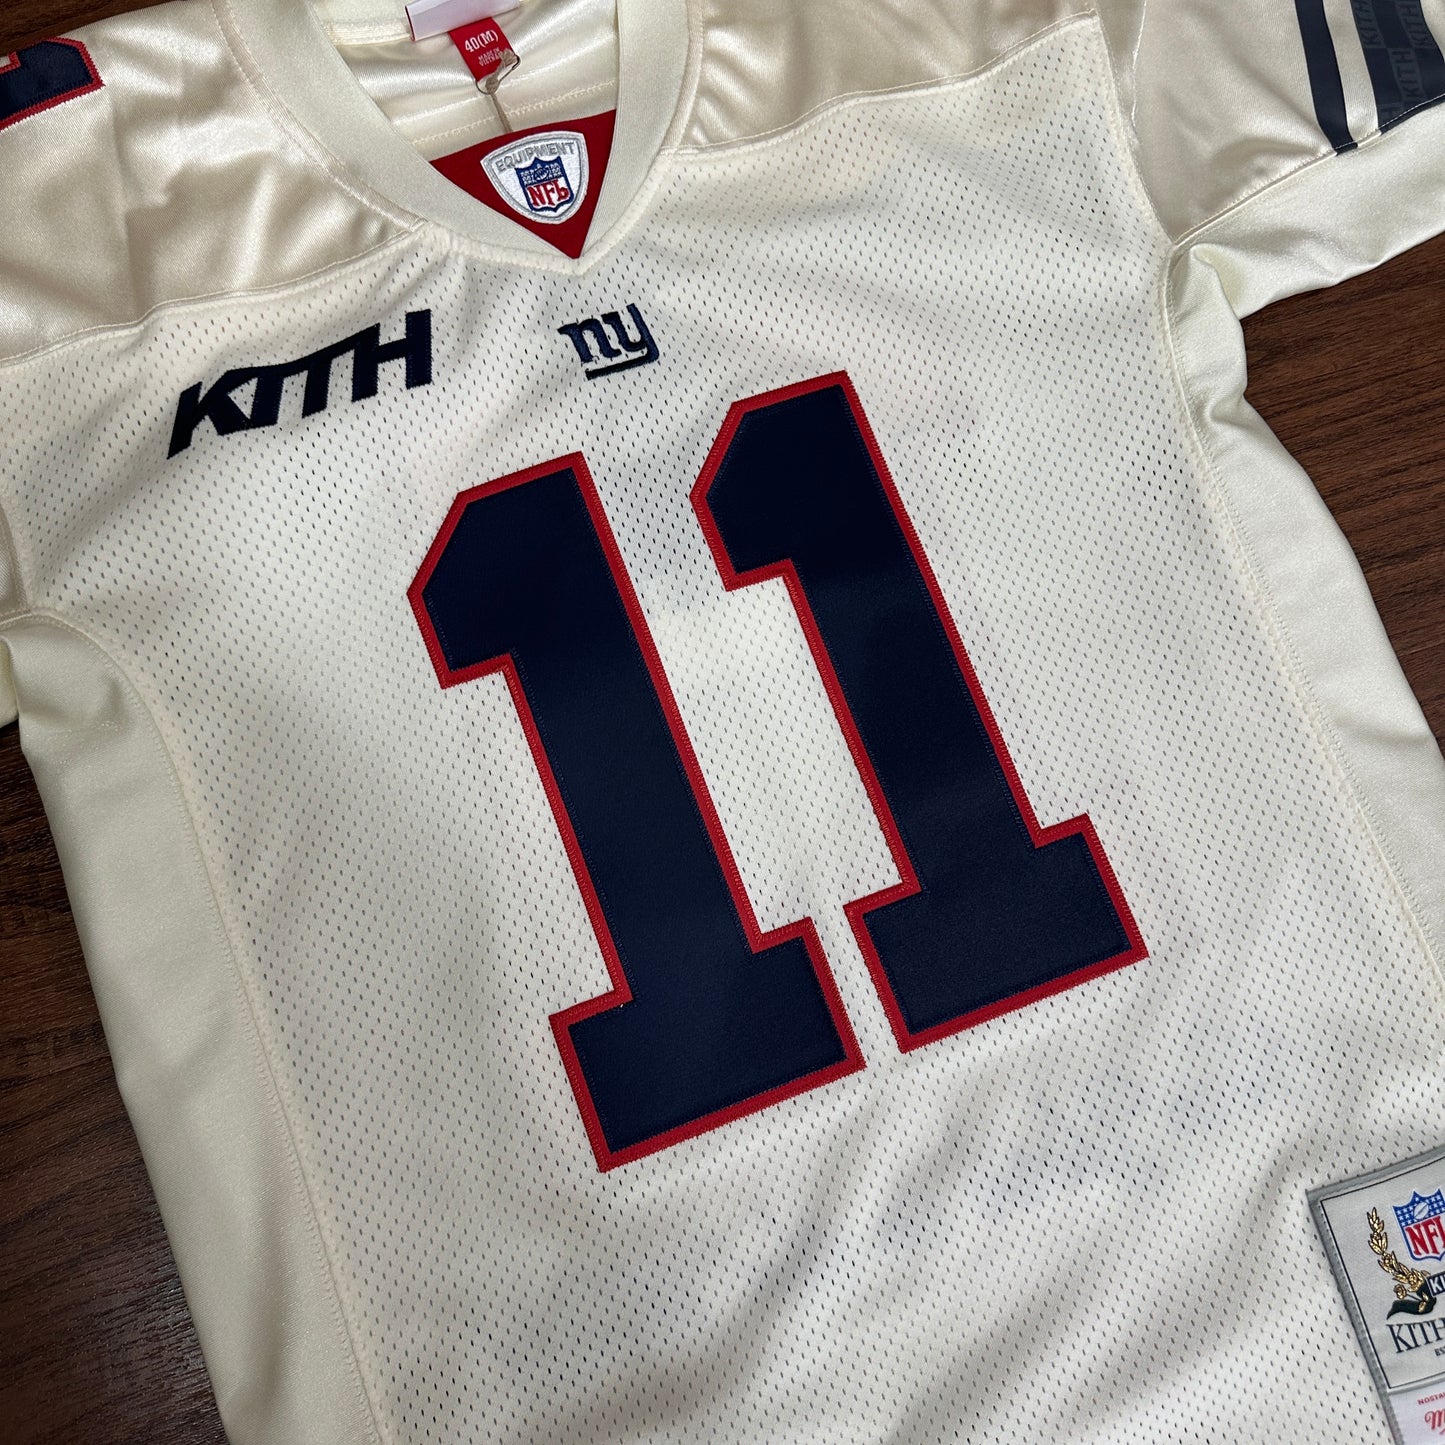 KITH x NFL Giants Jersey Phil Simms (Size M)